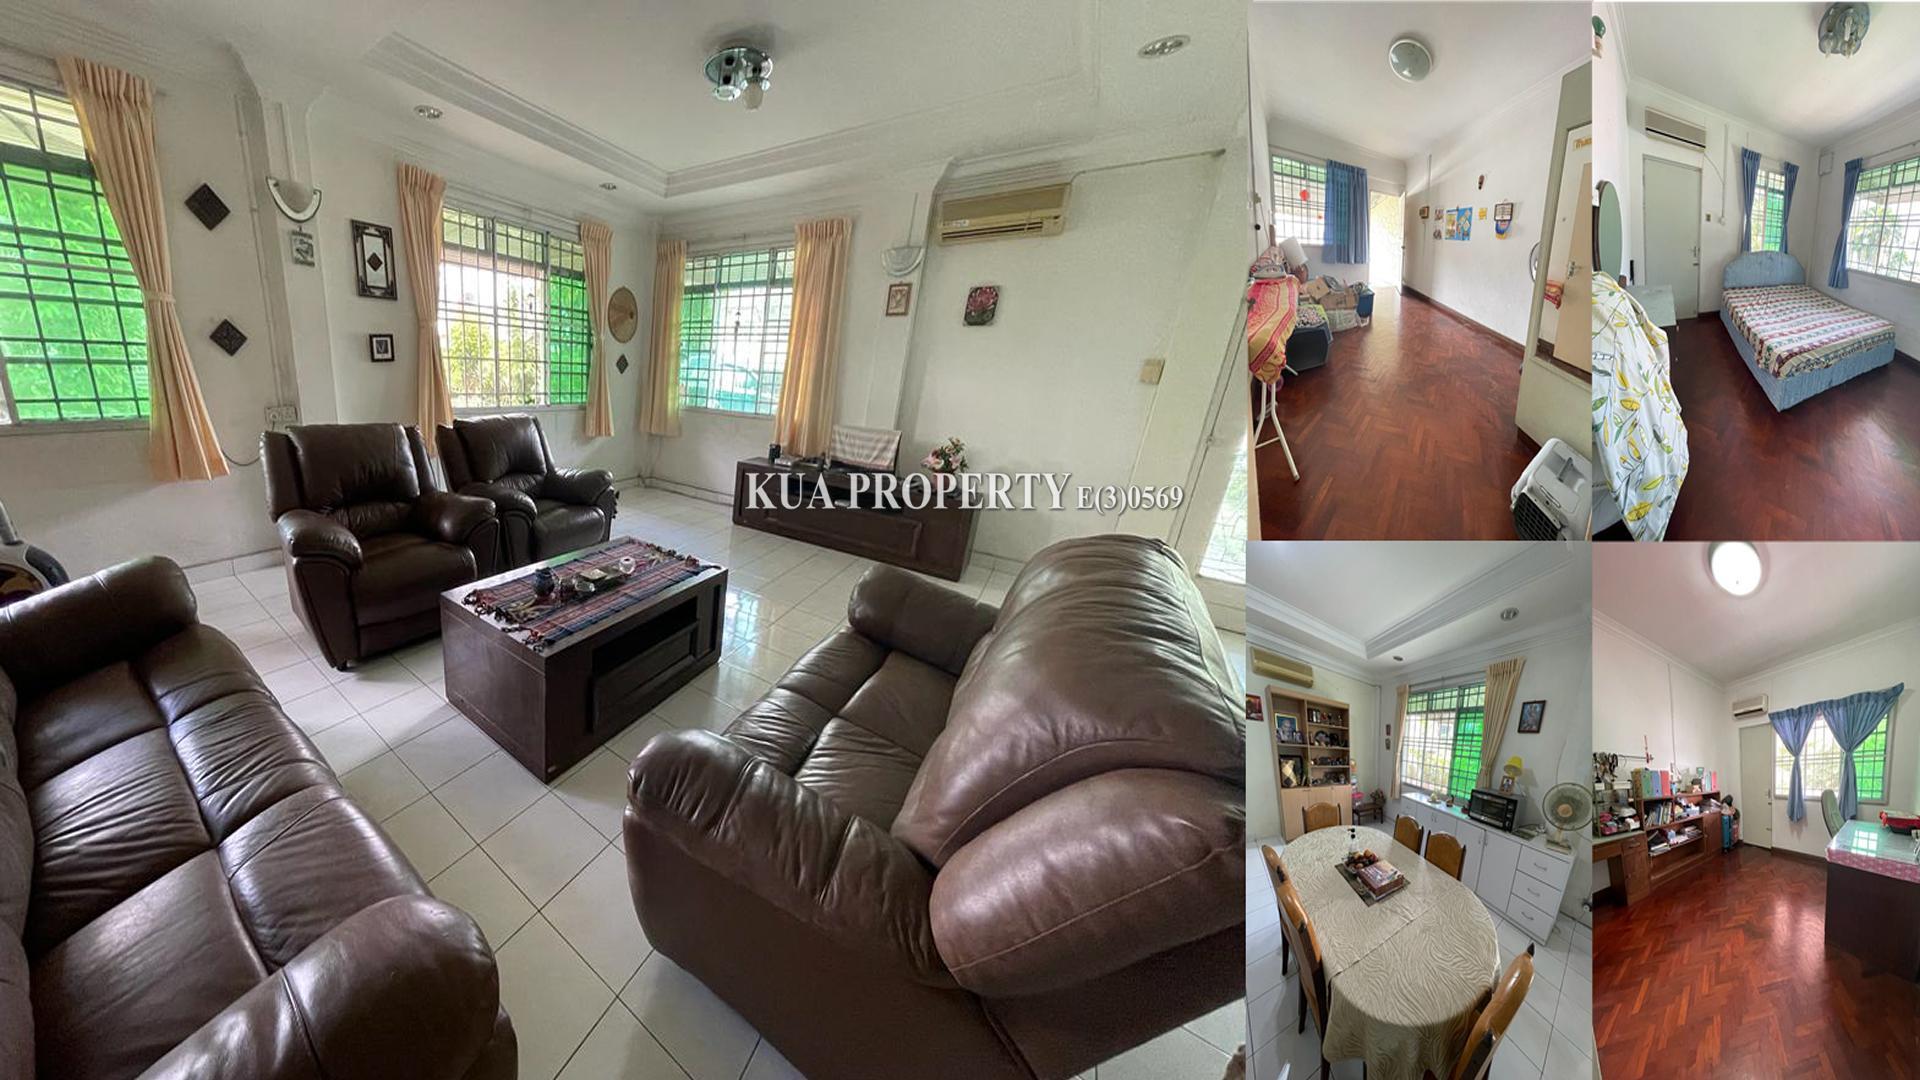 Double Storey Semi Detached house for Rent! Located at Wingli Garden (Behind KWB,Batu Lintang)